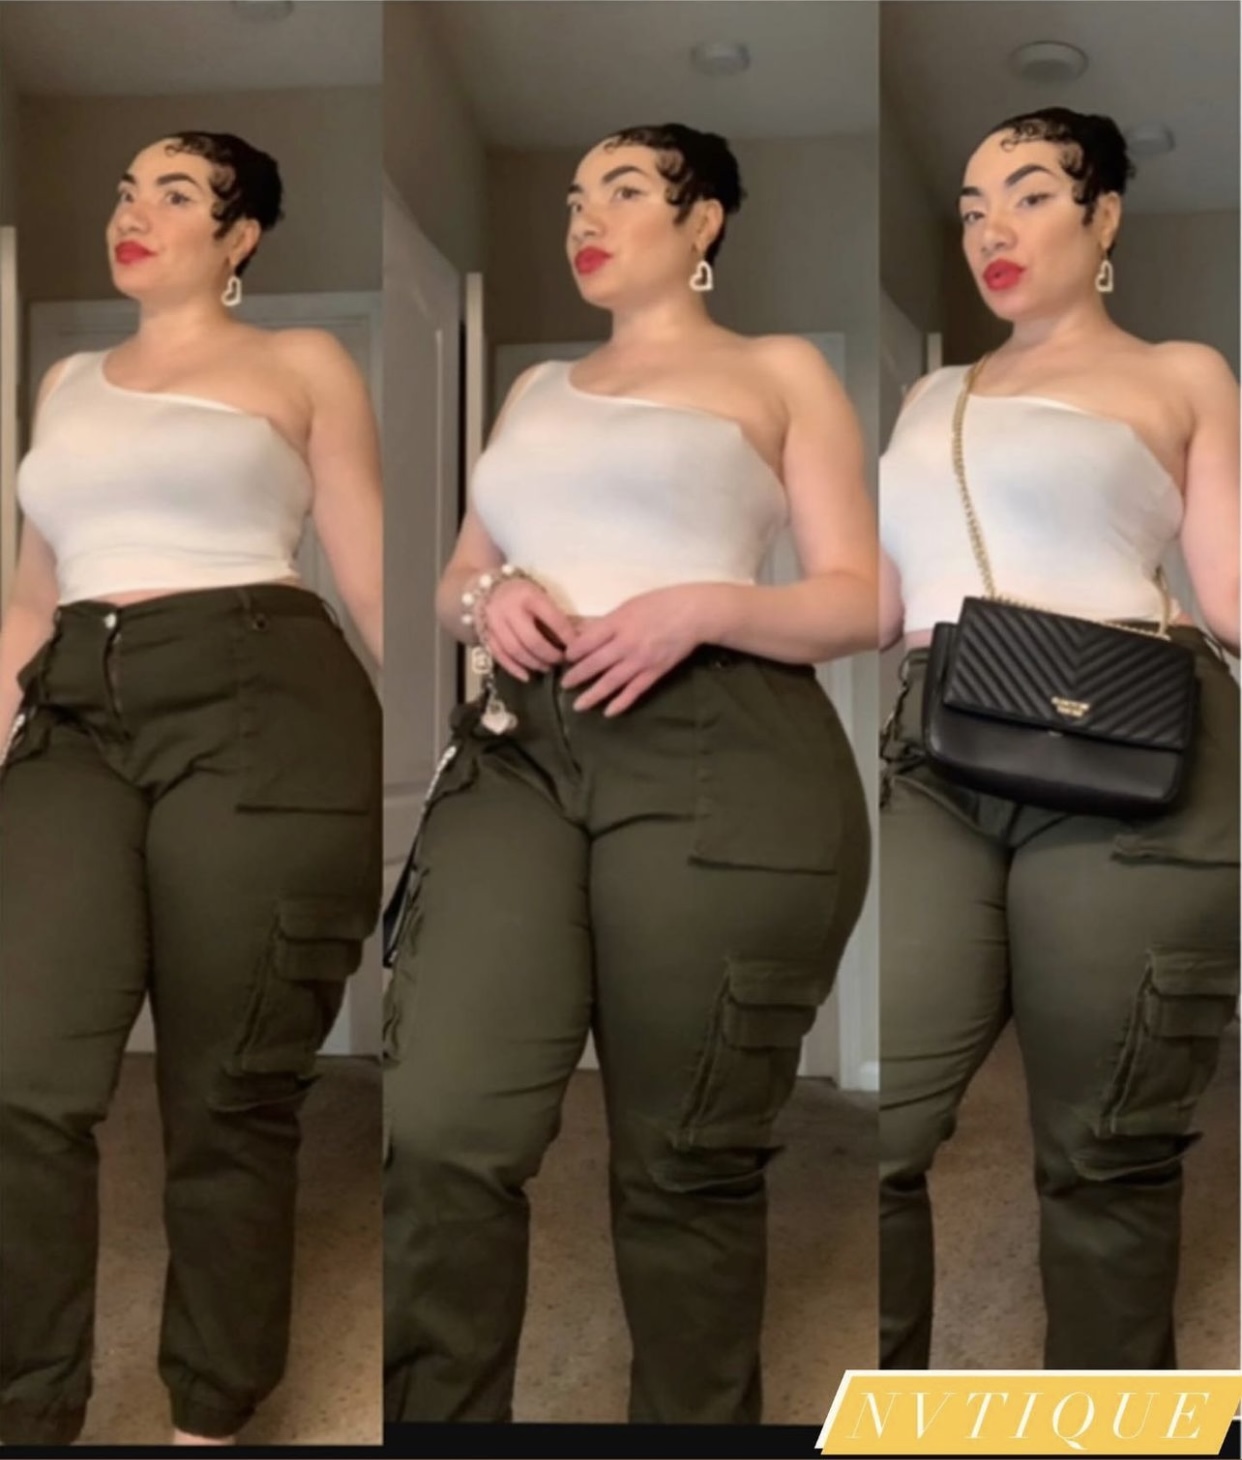 Plus Size Cargo Pant Outfits